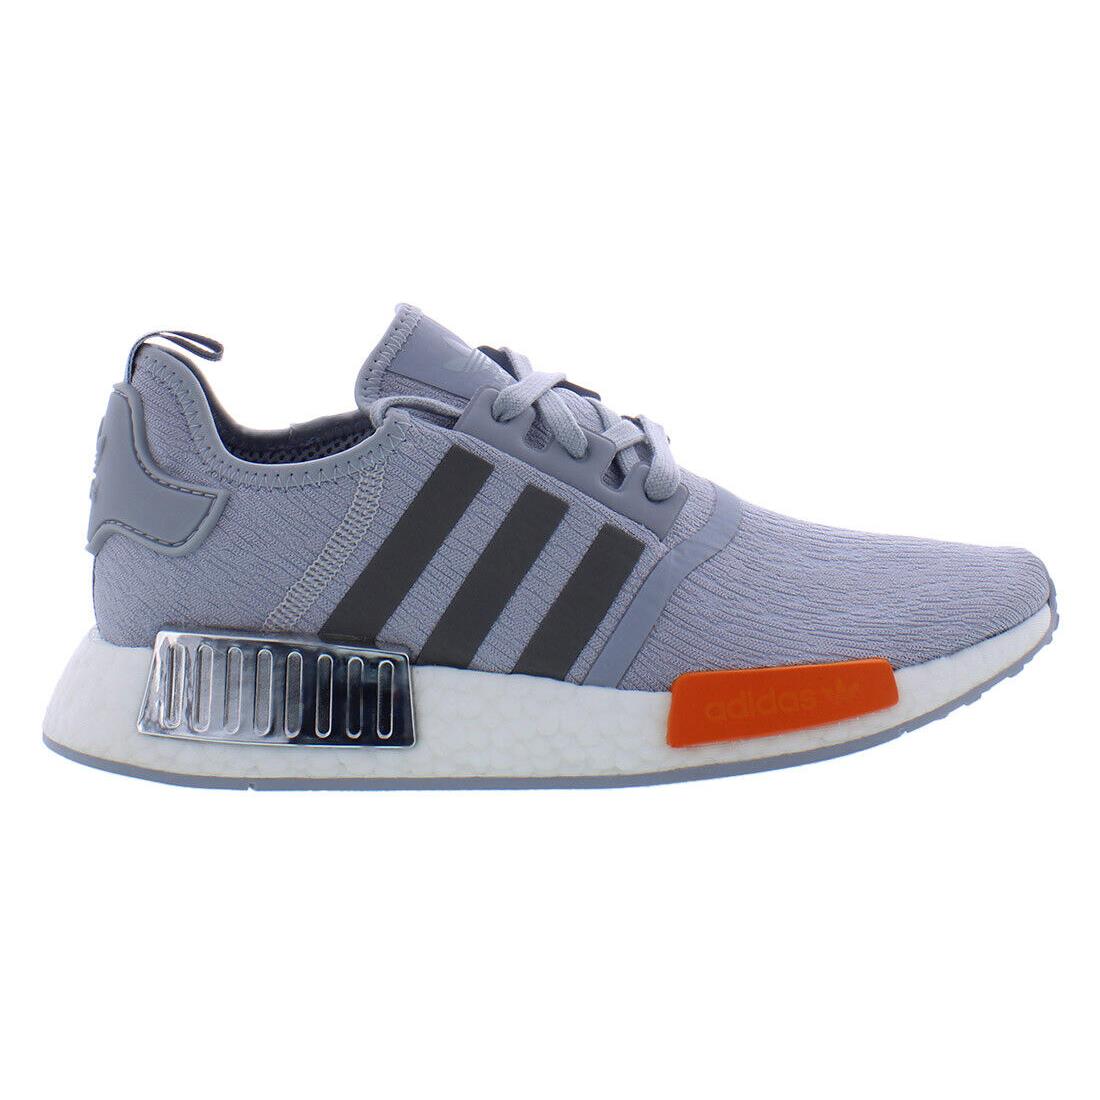 Adidas NMD_R1 Mens Shoes Size 14 Color: Grey/black/silver - Grey/Black/Silver, Main: Grey